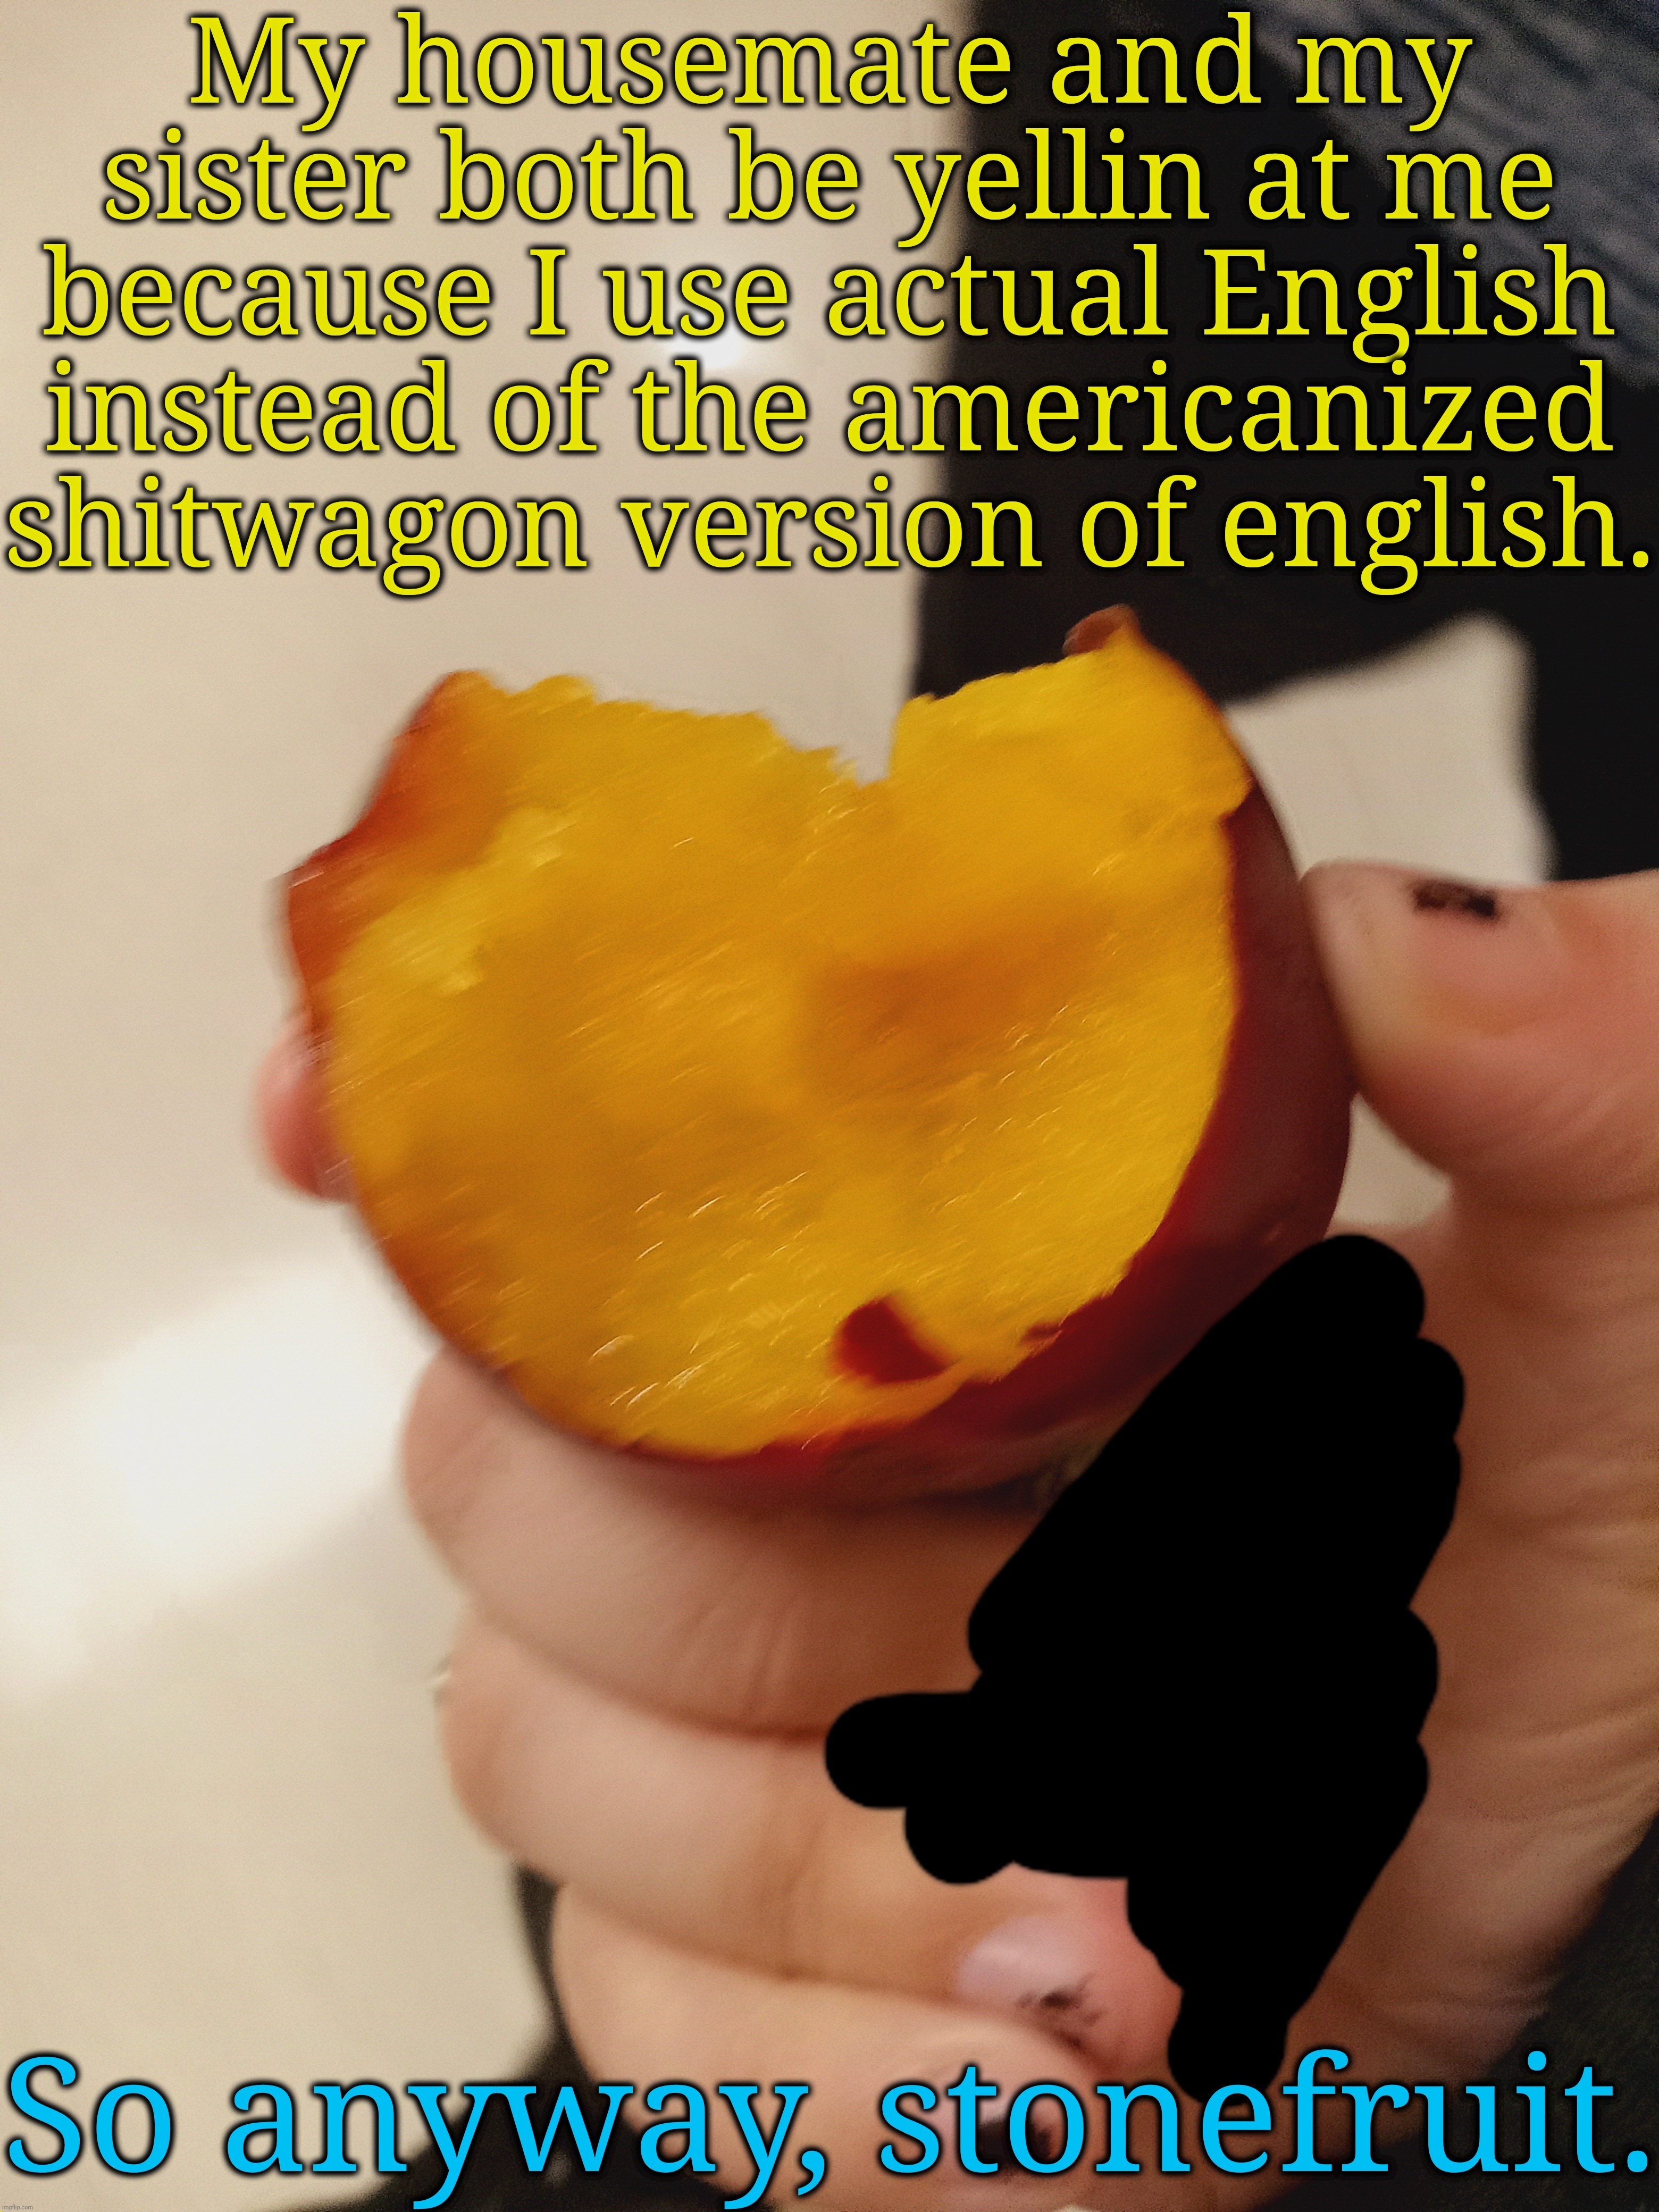 My housemate and my sister both be yellin at me because I use actual English instead of the americanized shitwagon version of english. So anyway, stonefruit. | made w/ Imgflip meme maker